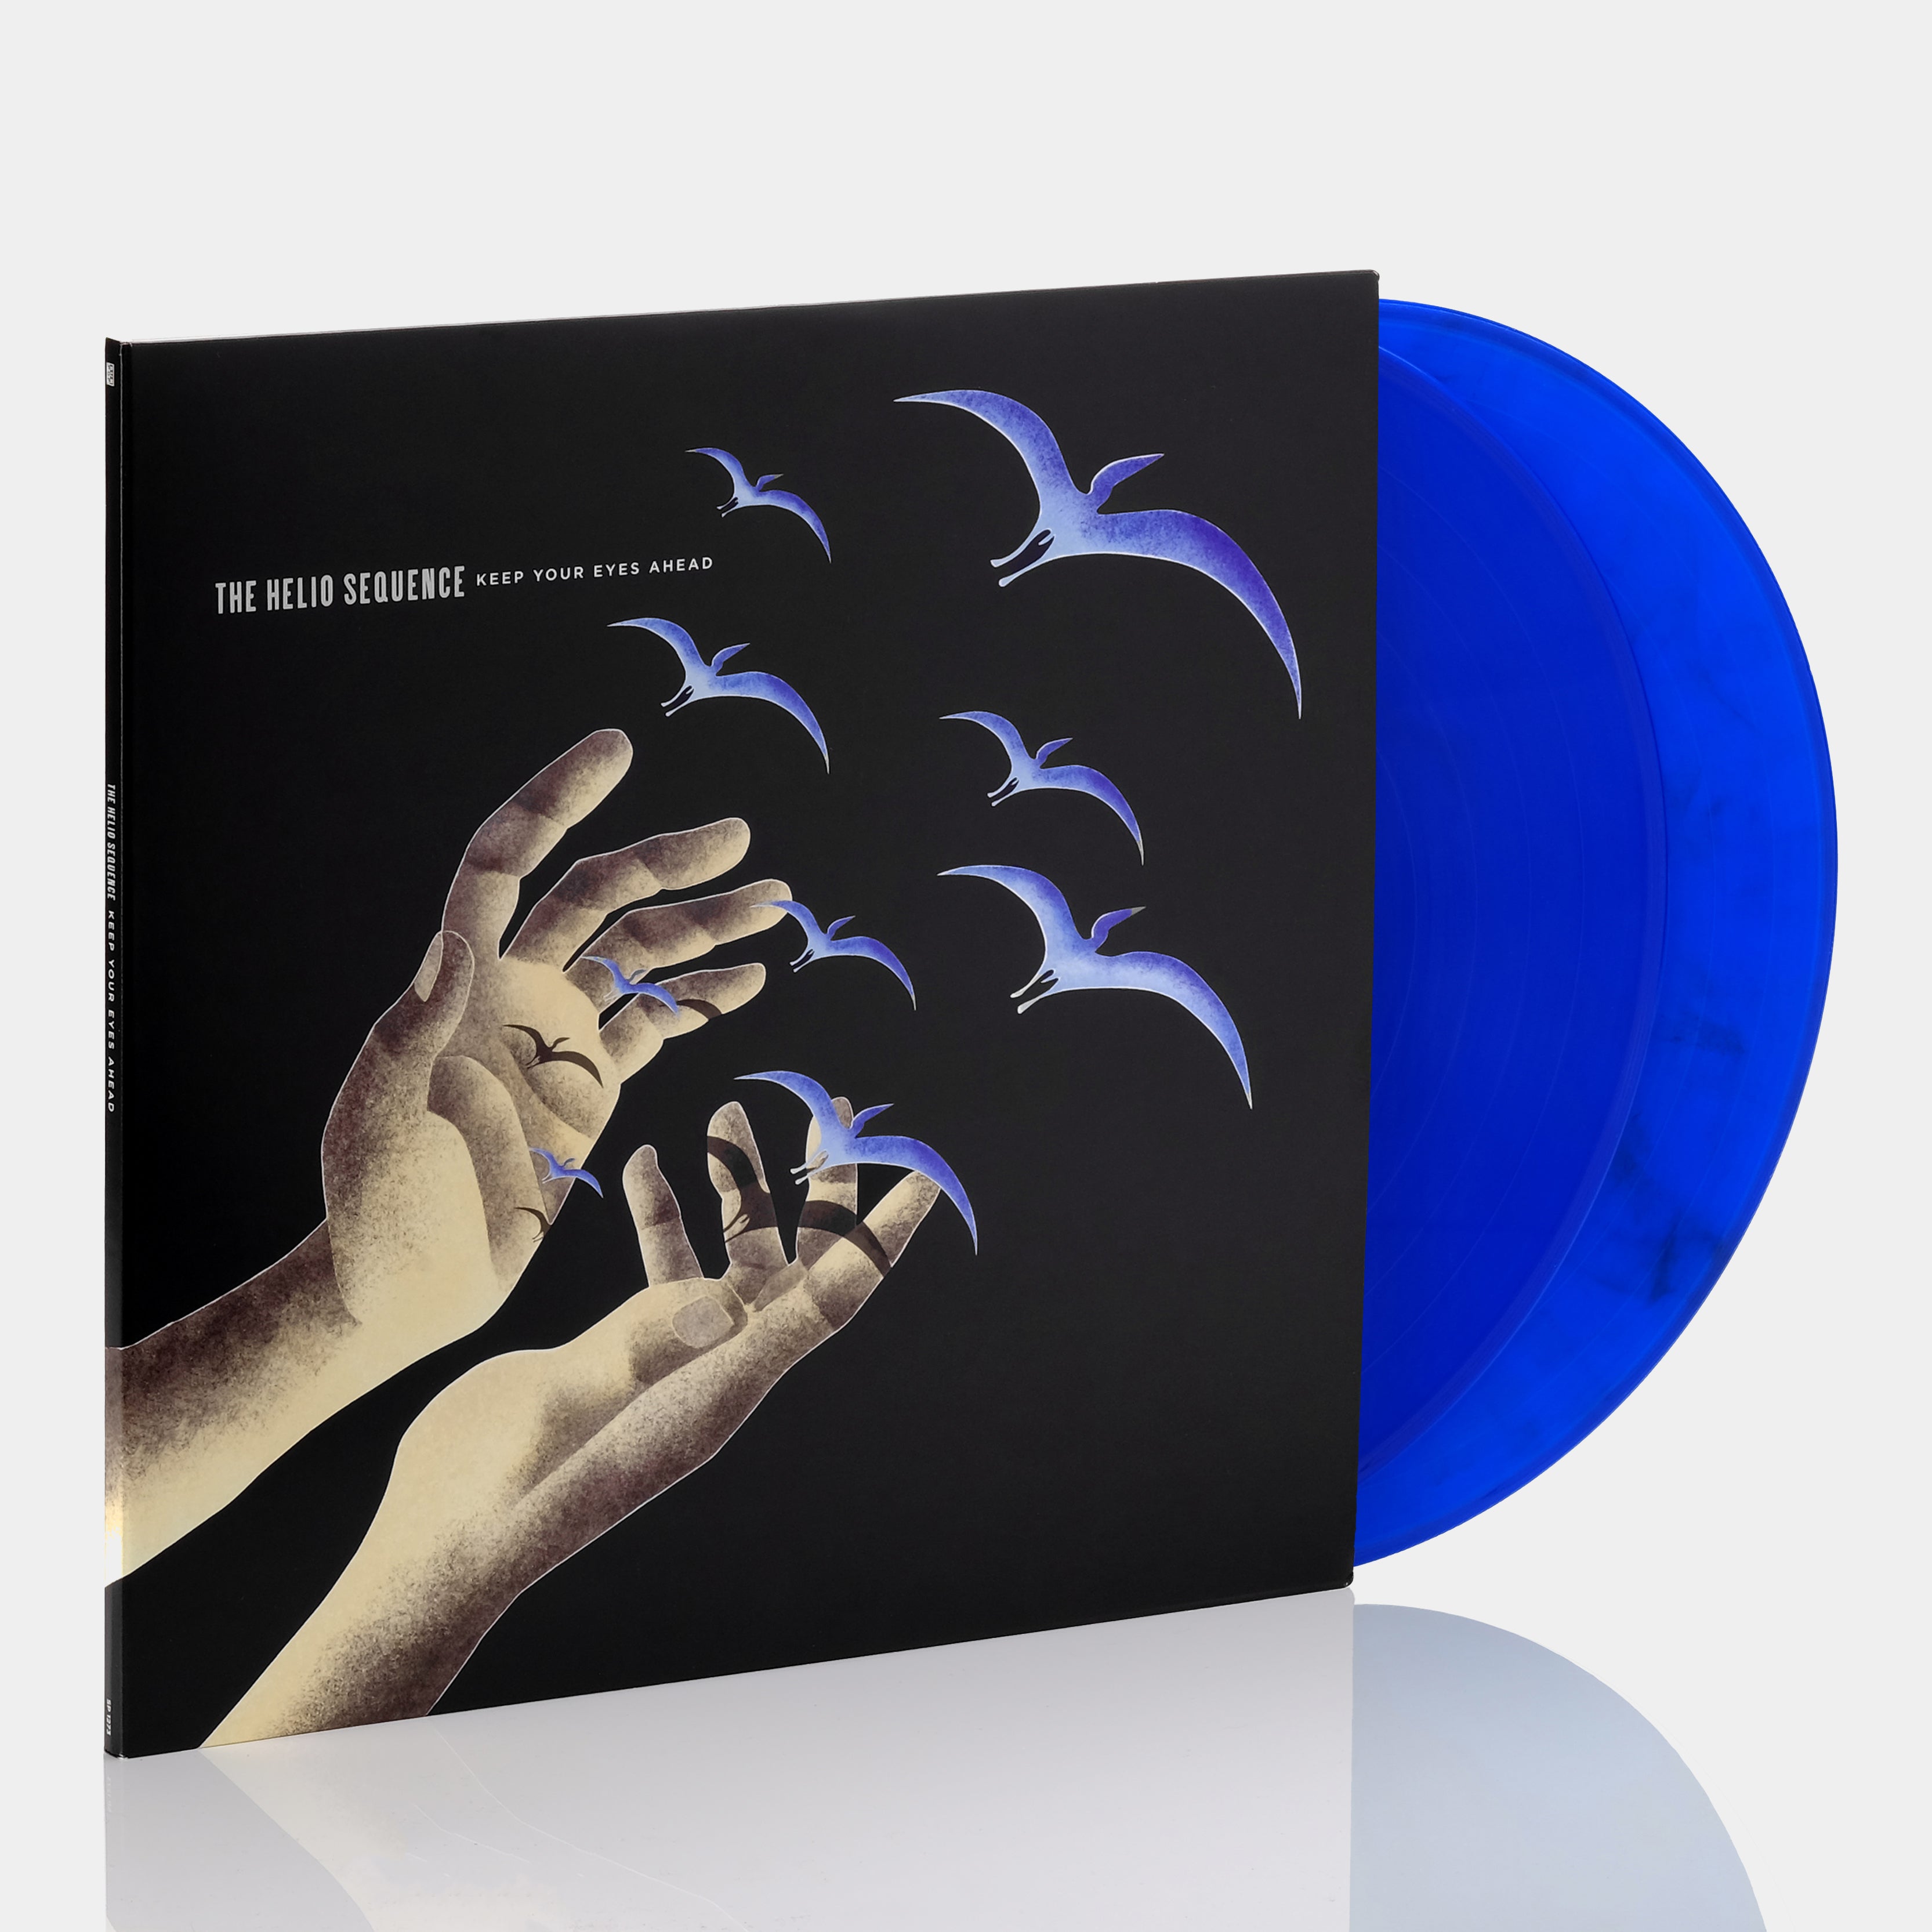 The Helio Sequence - Keep Your Eyes Ahead (Deluxe Edition) 2xLP Blue Vinyl Record